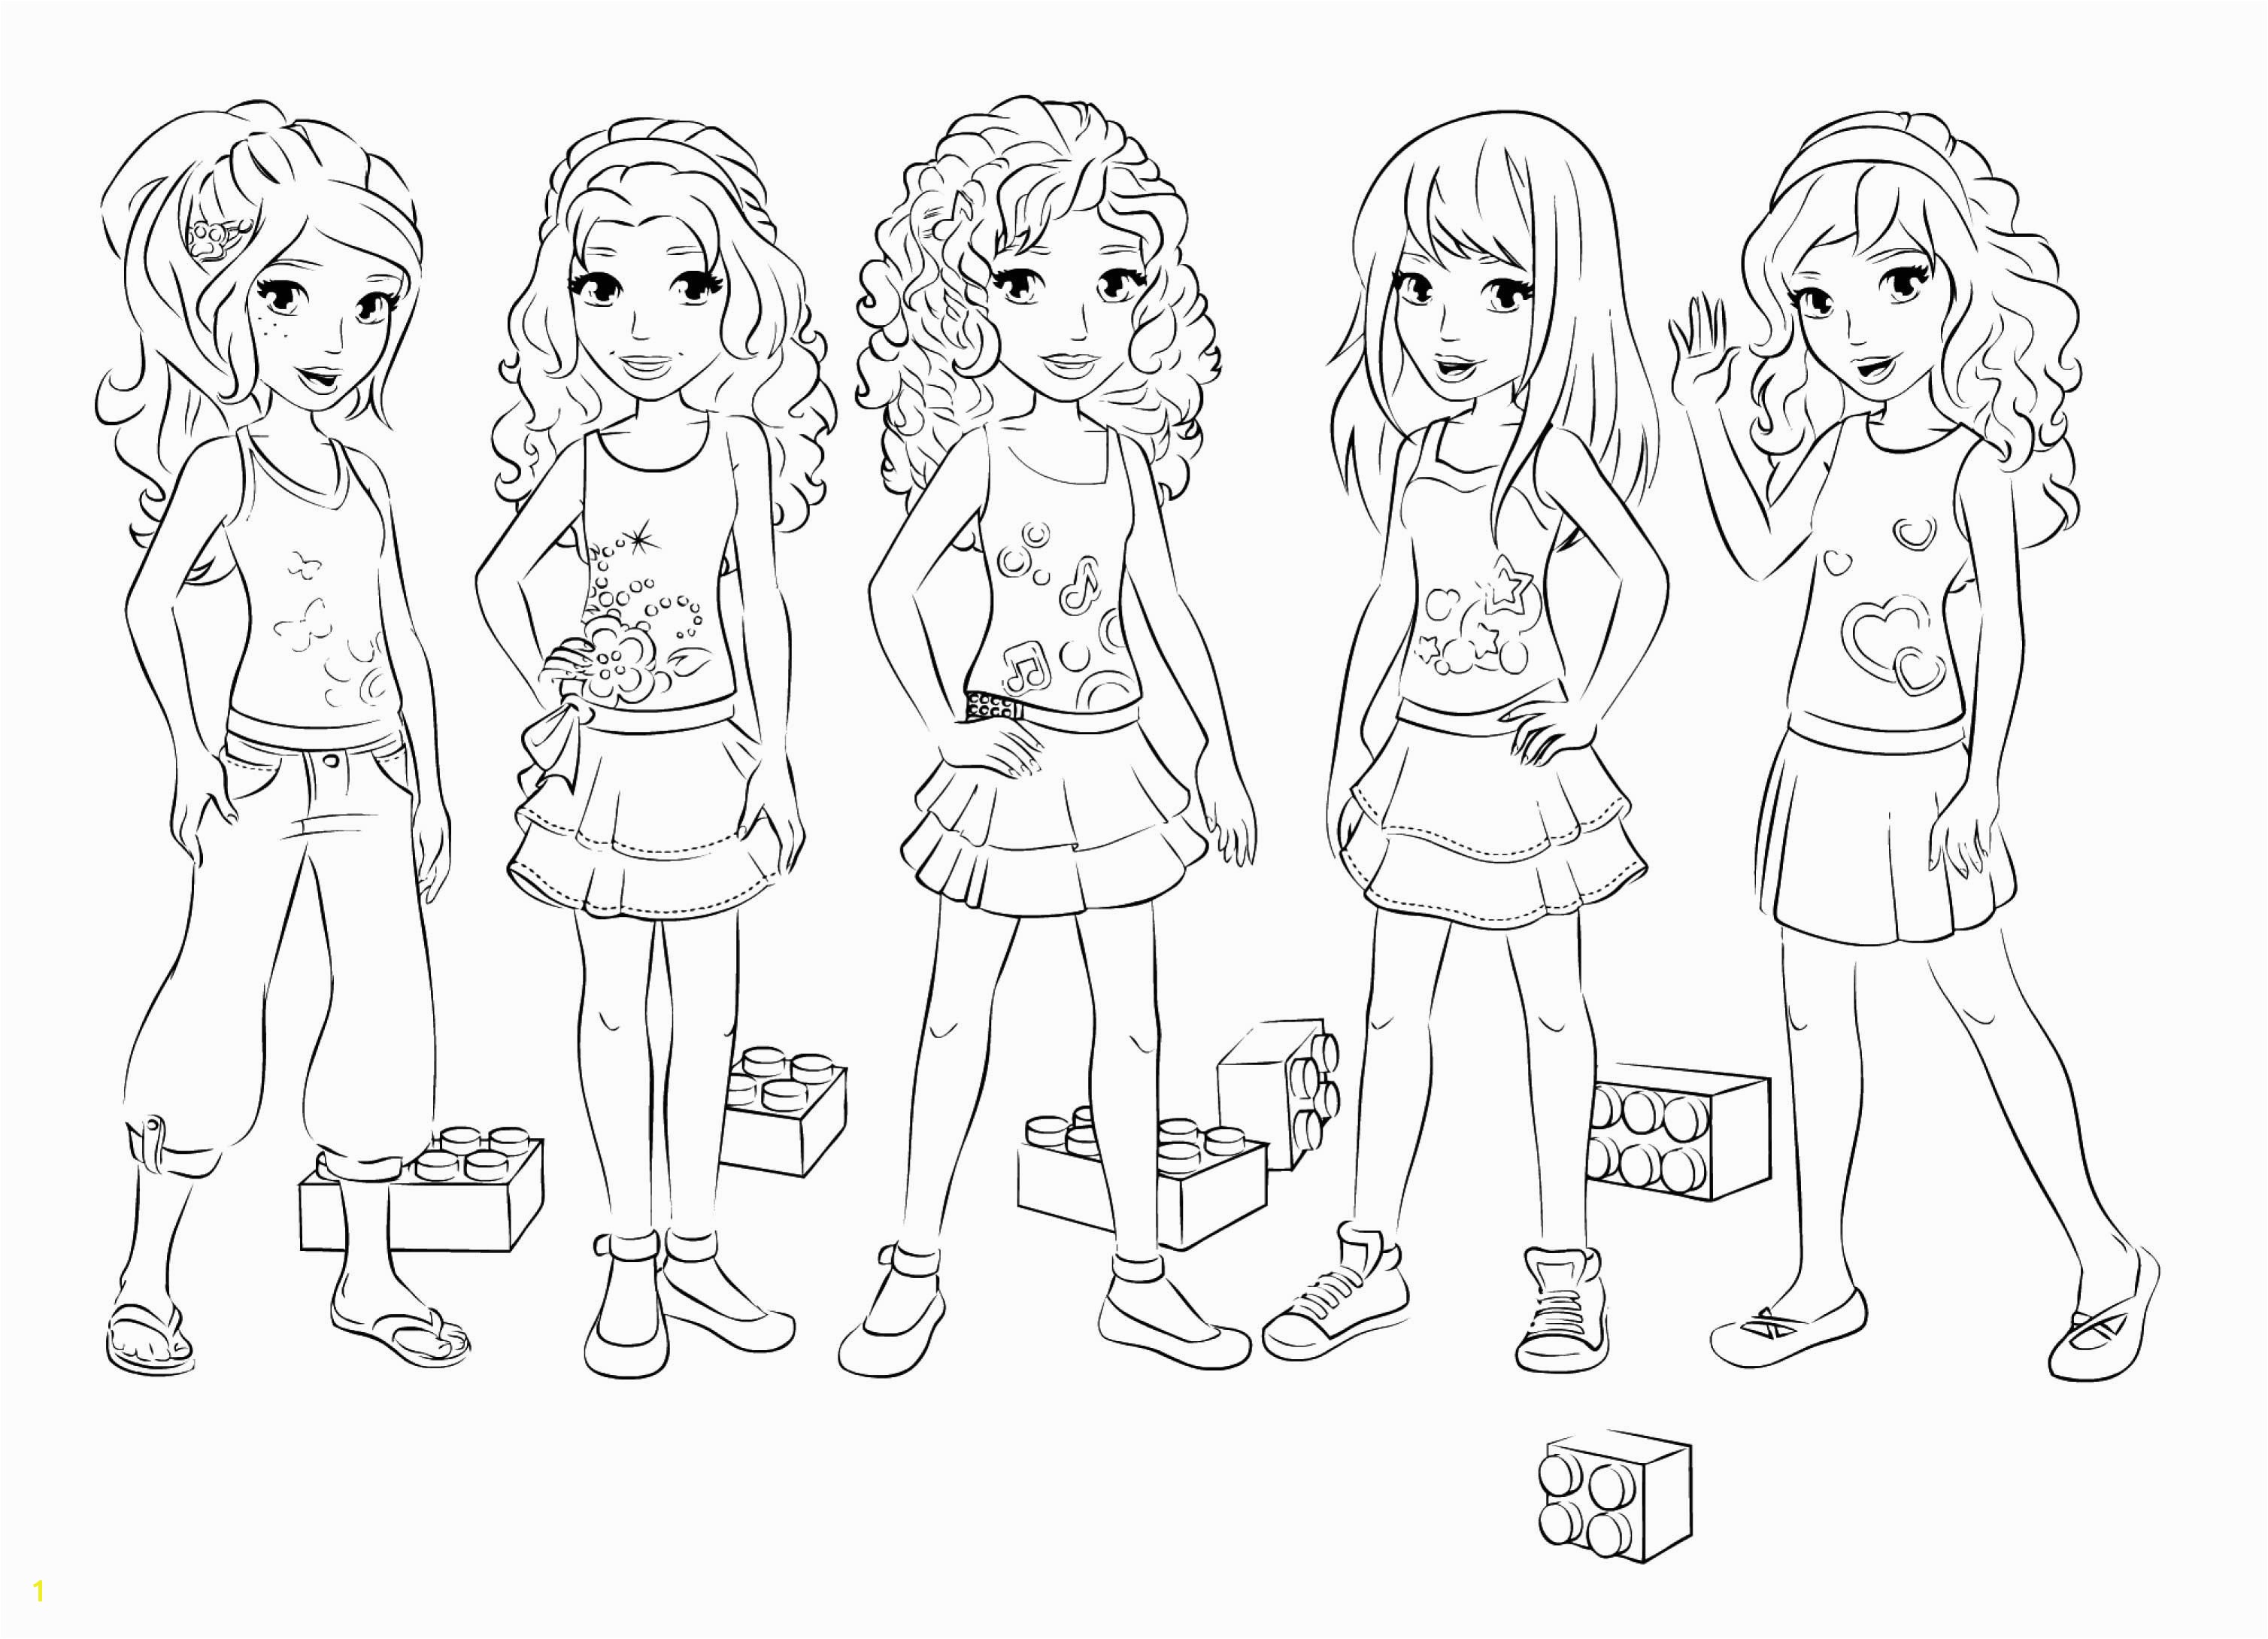 Printable Lego Friends Coloring Pages Pin by Danielle Lefebvre On Birthday Party Ideas In 2018